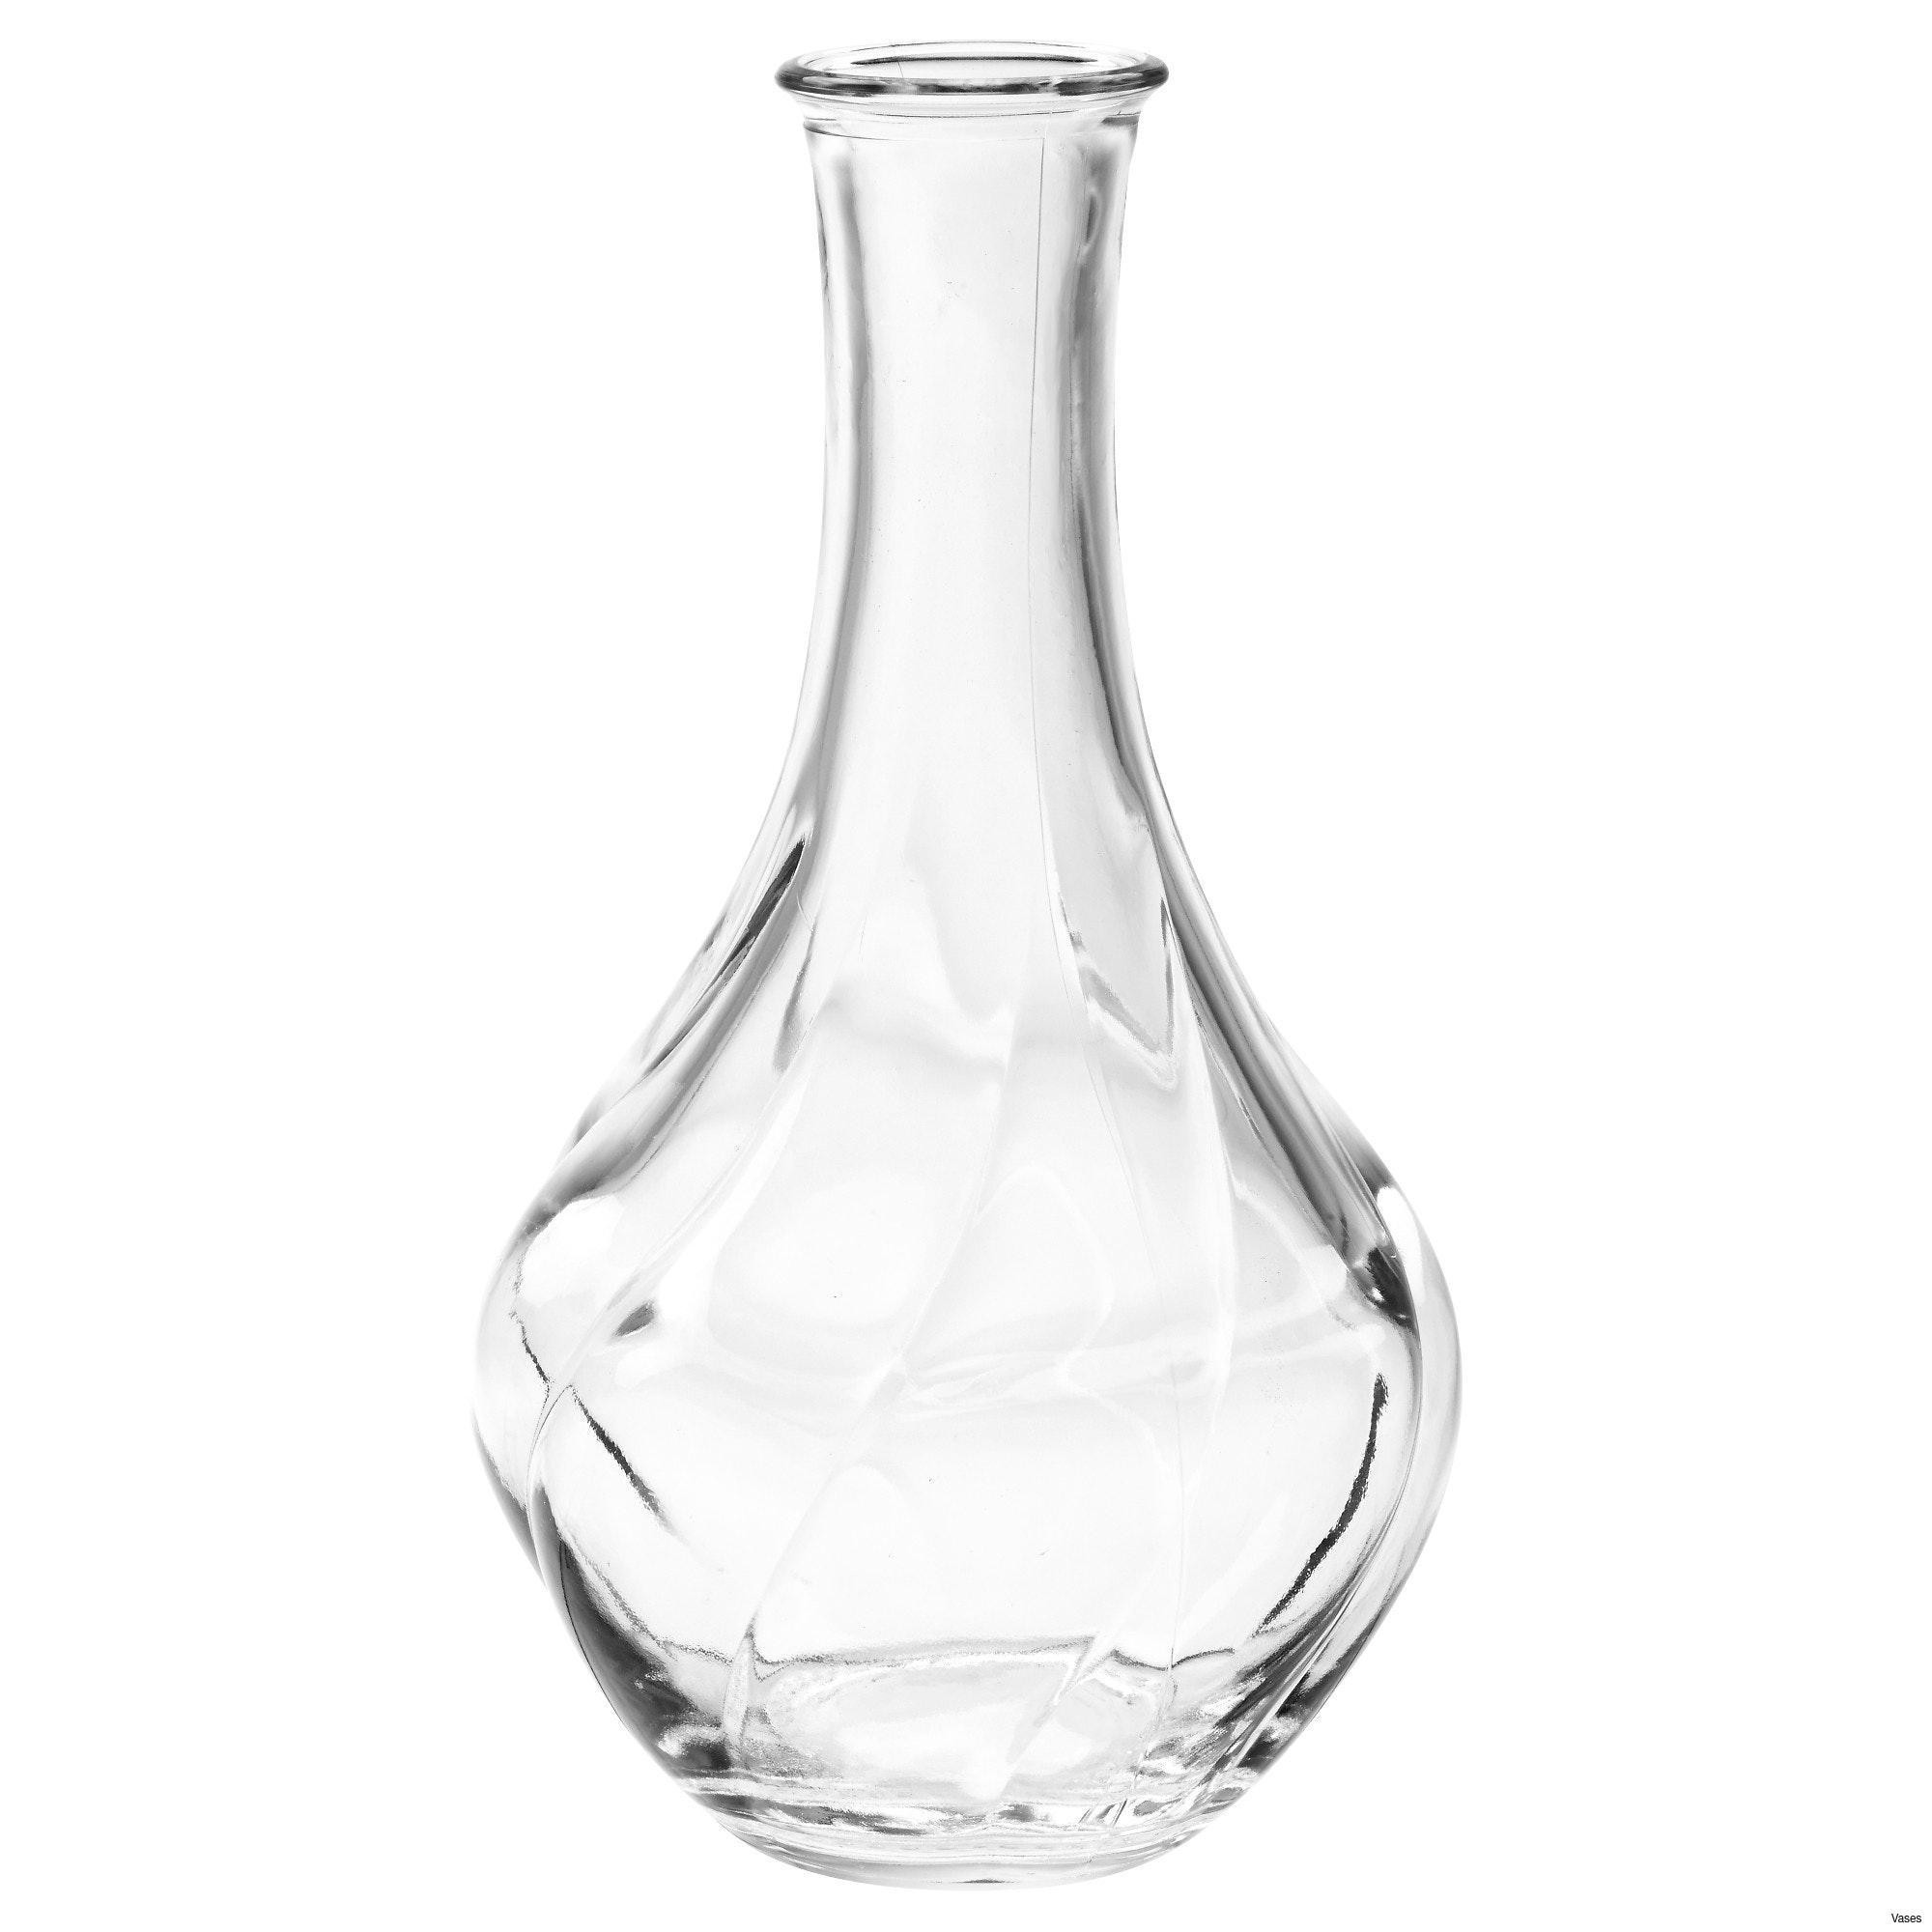 15 Cute Ribbed Mercury Glass Vase 2022 free download ribbed mercury glass vase of vases artificial plants collection page 10 throughout large white vases photos living room glass vases fresh clear vase 0d tags amazing and of large white vases